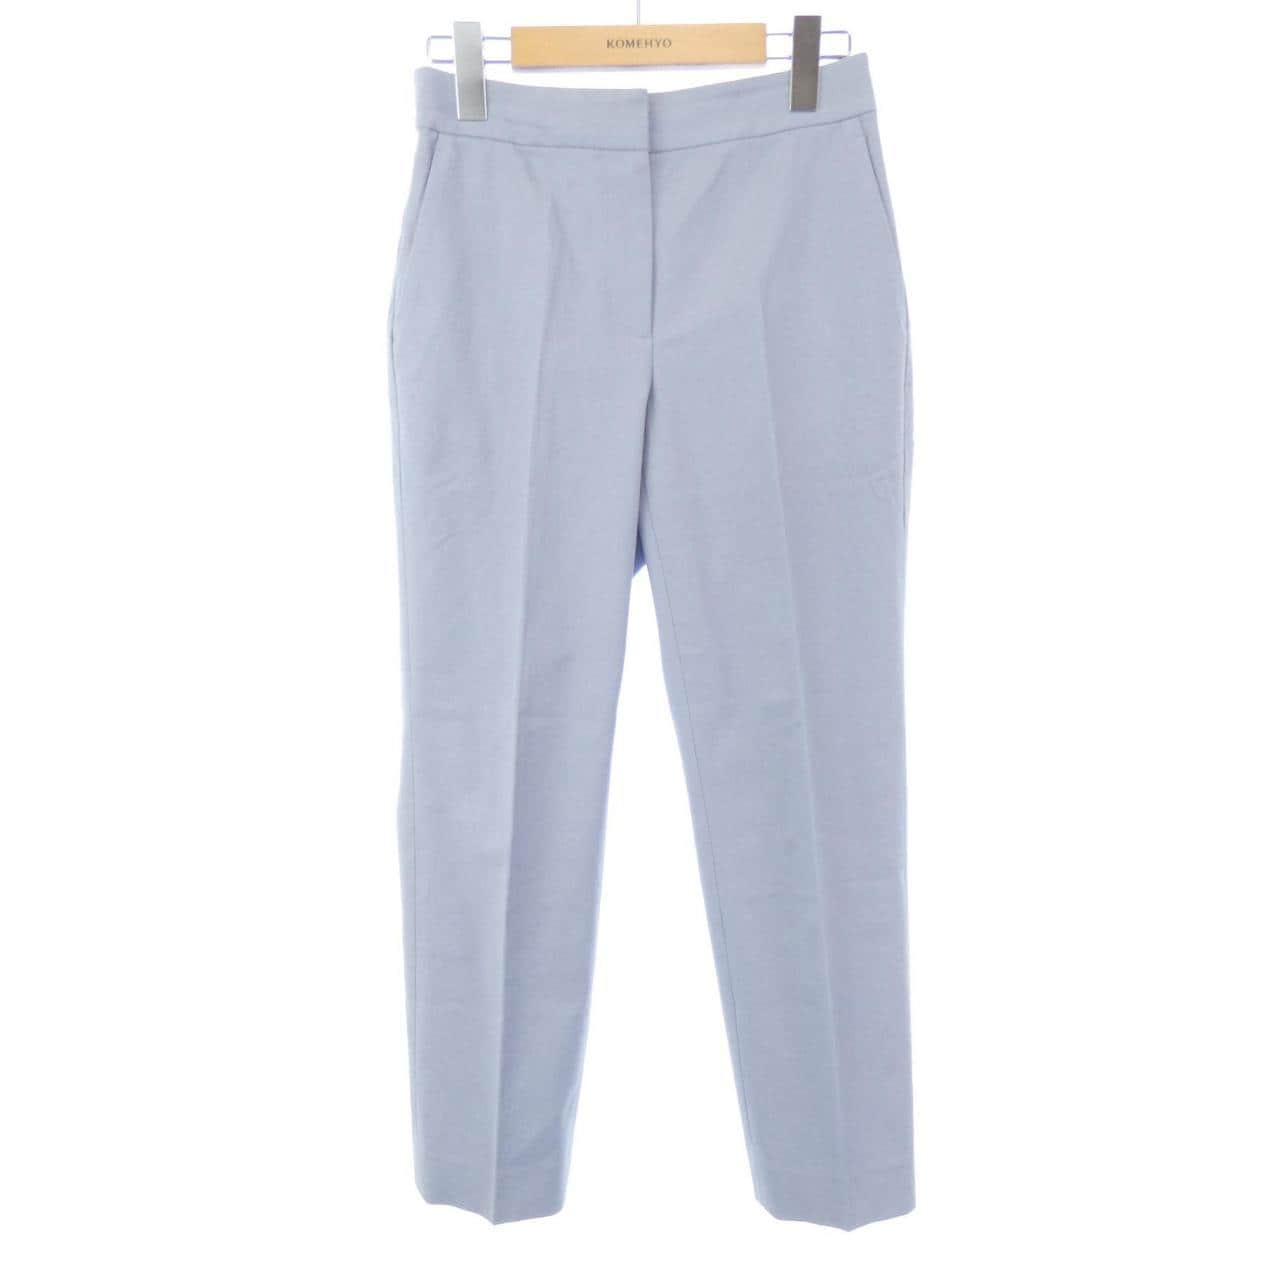 Theory luxe pants